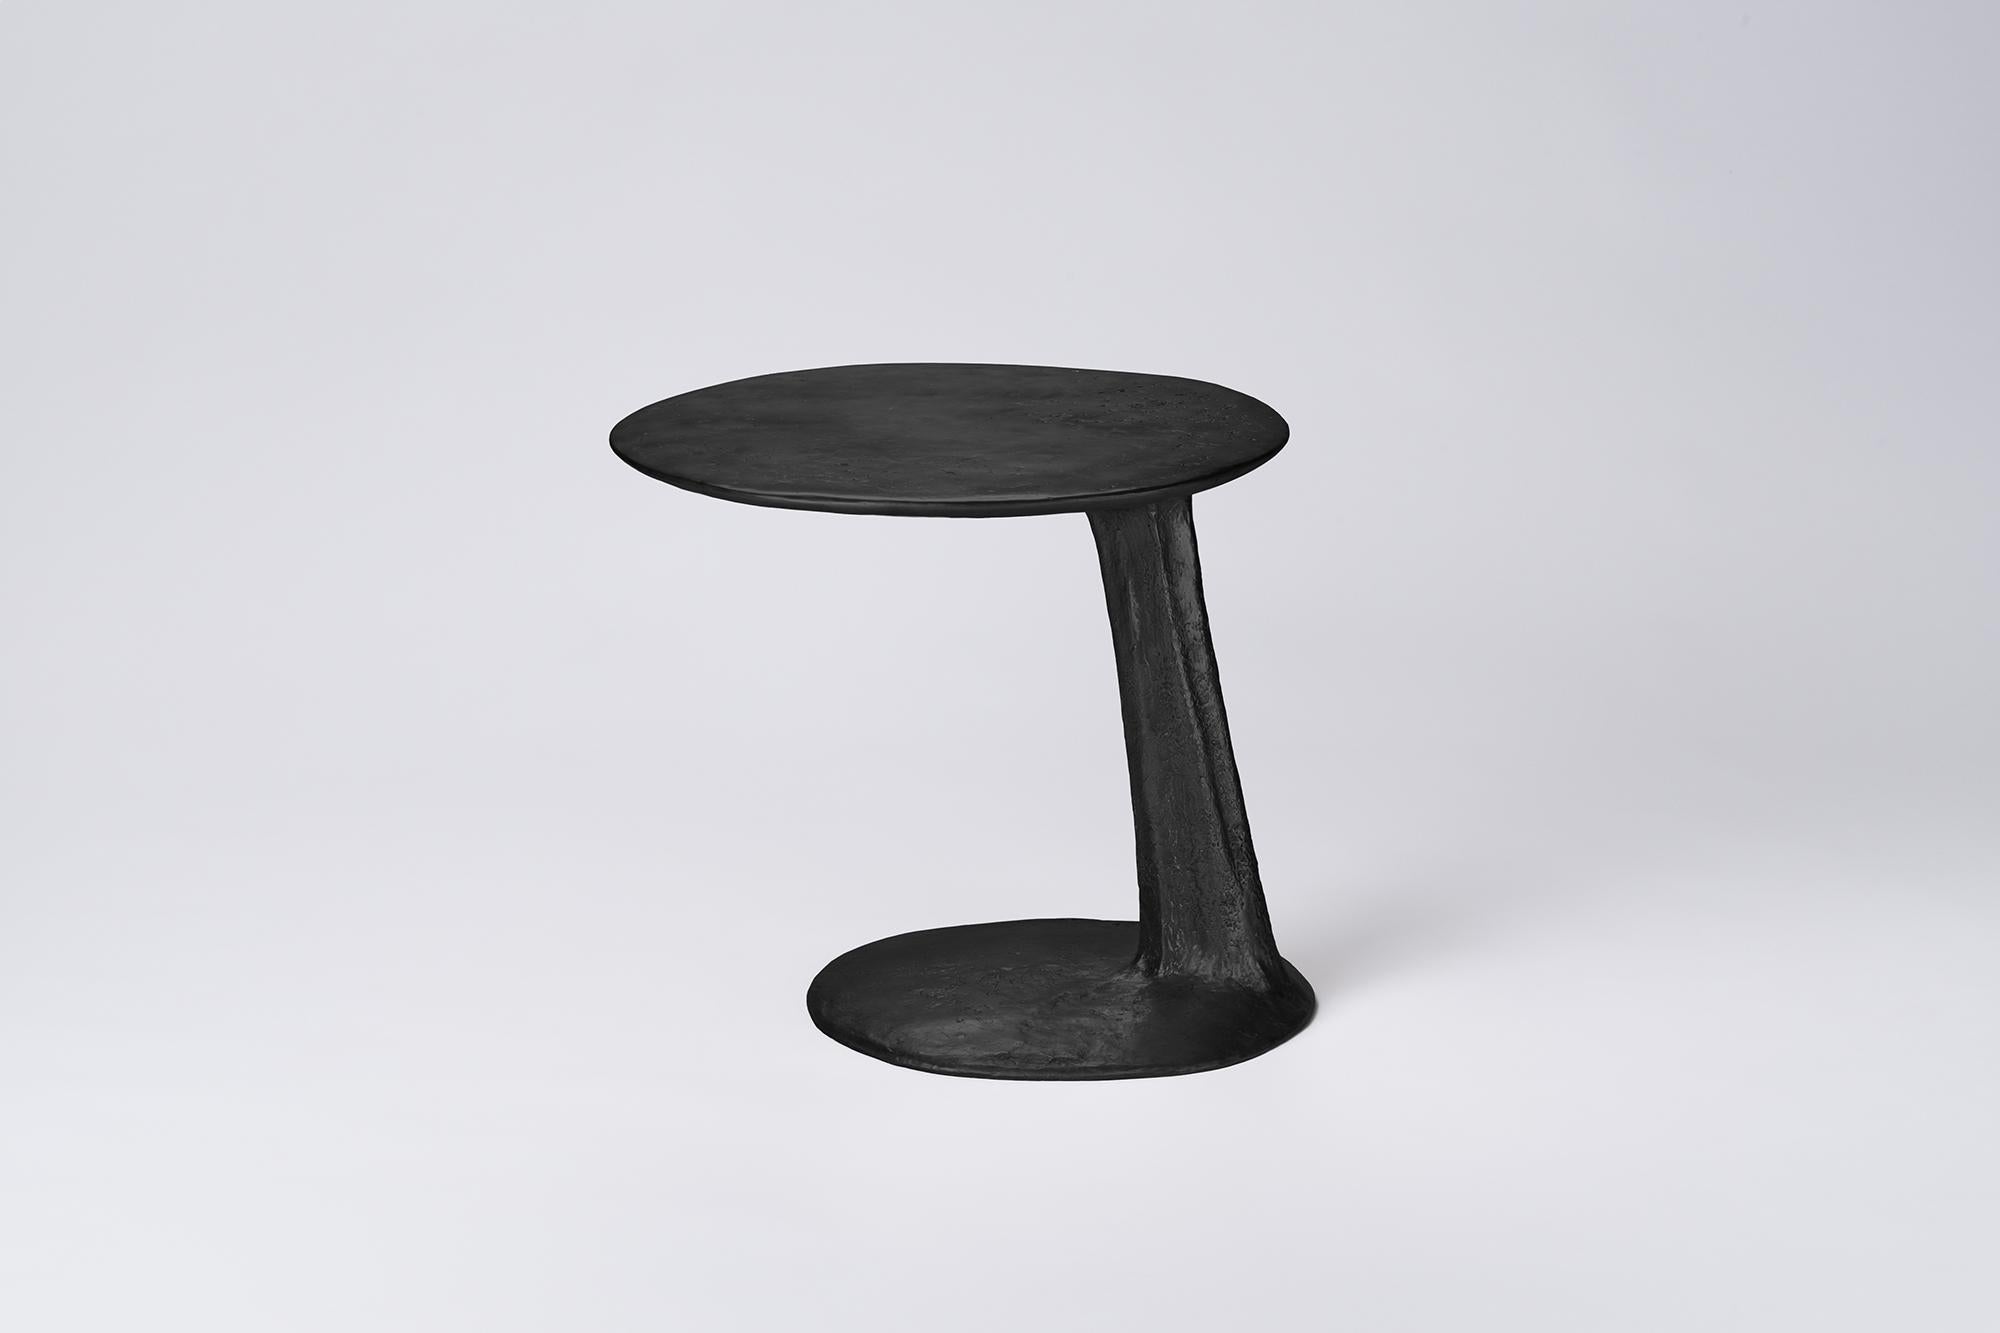 Black Cast Brass Lava Large Side Table by Atelier V&F
Dimensions: D 52 x W 50 x H 46 cm. 
Materials: Cast brass with a black finish.

Available in different finishes (cast, black and silver). Available in two different sizes. Prices may vary. Please